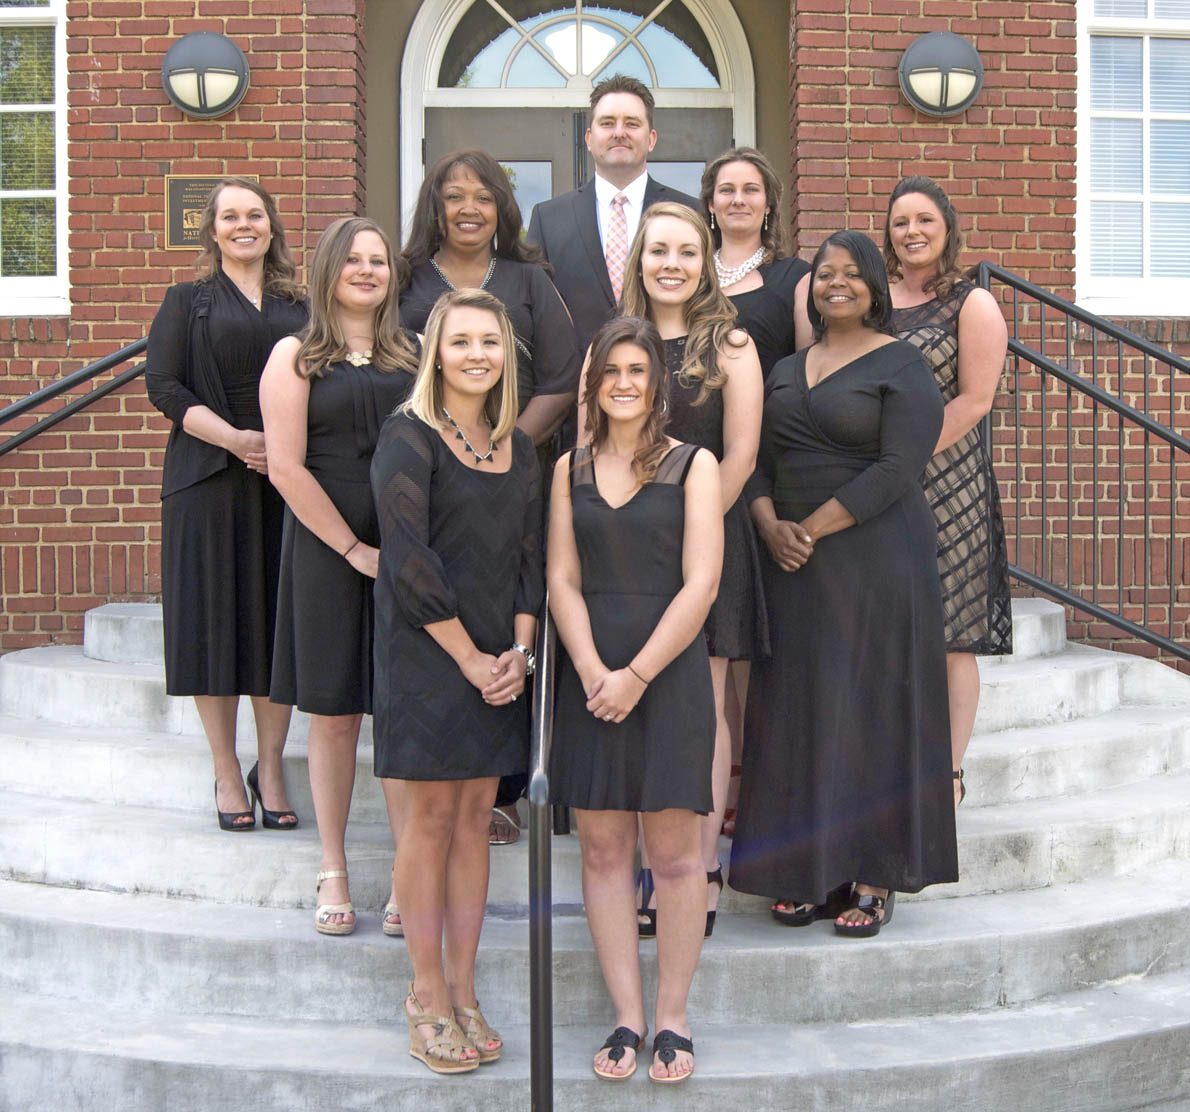 CCCC has Pinning Ceremony for Dental Hygiene students